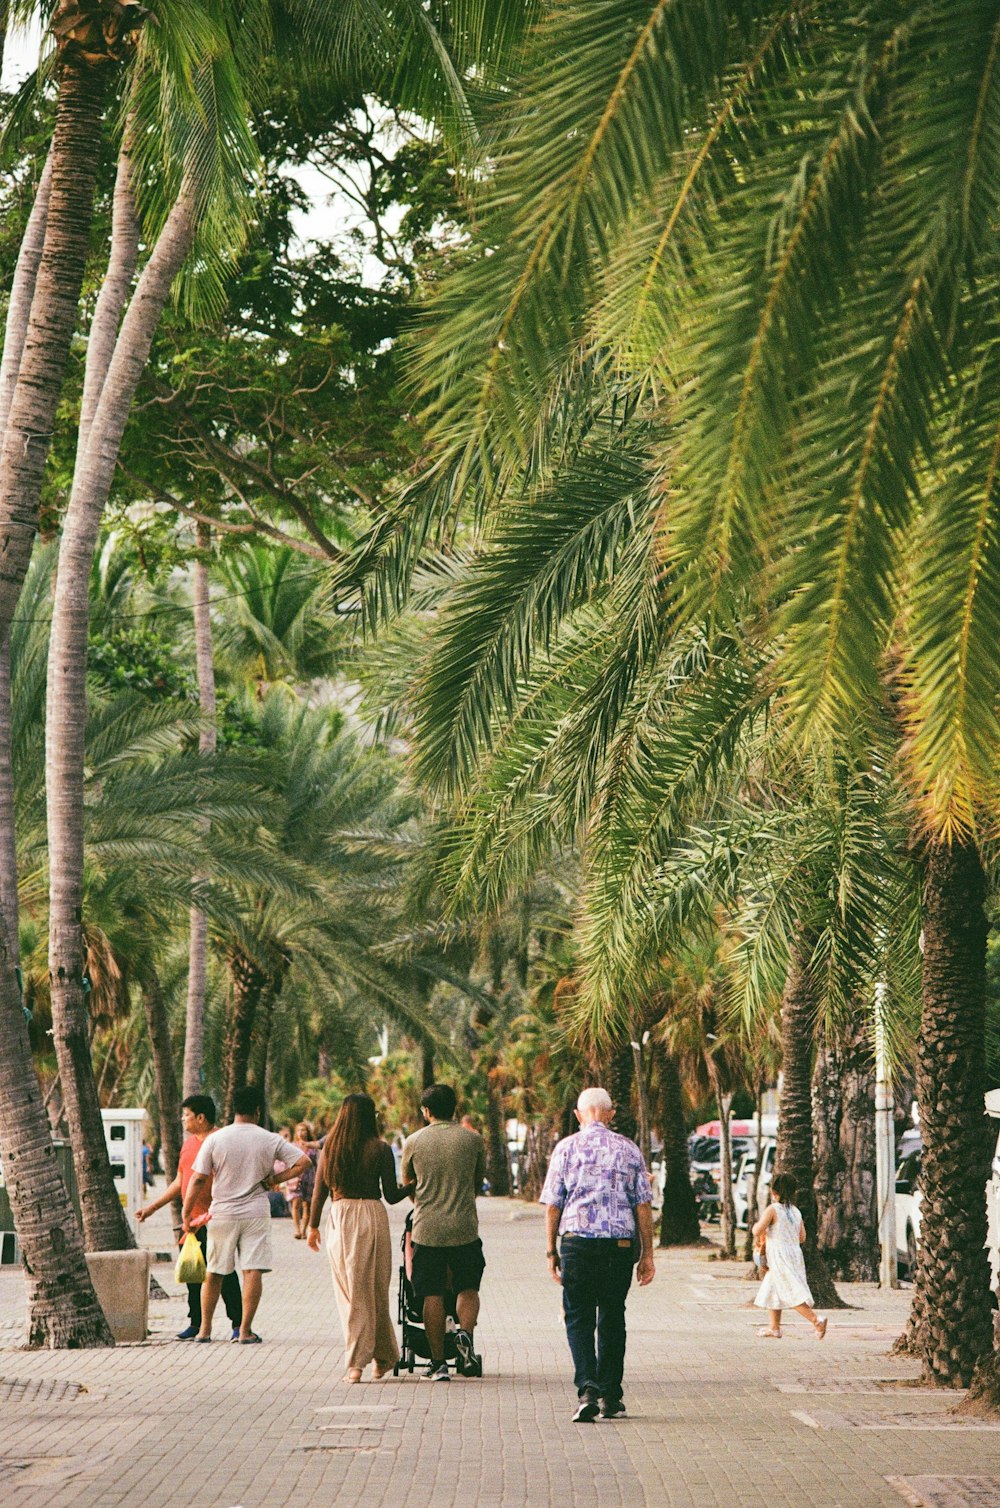 a group of people walking on a path between palm trees